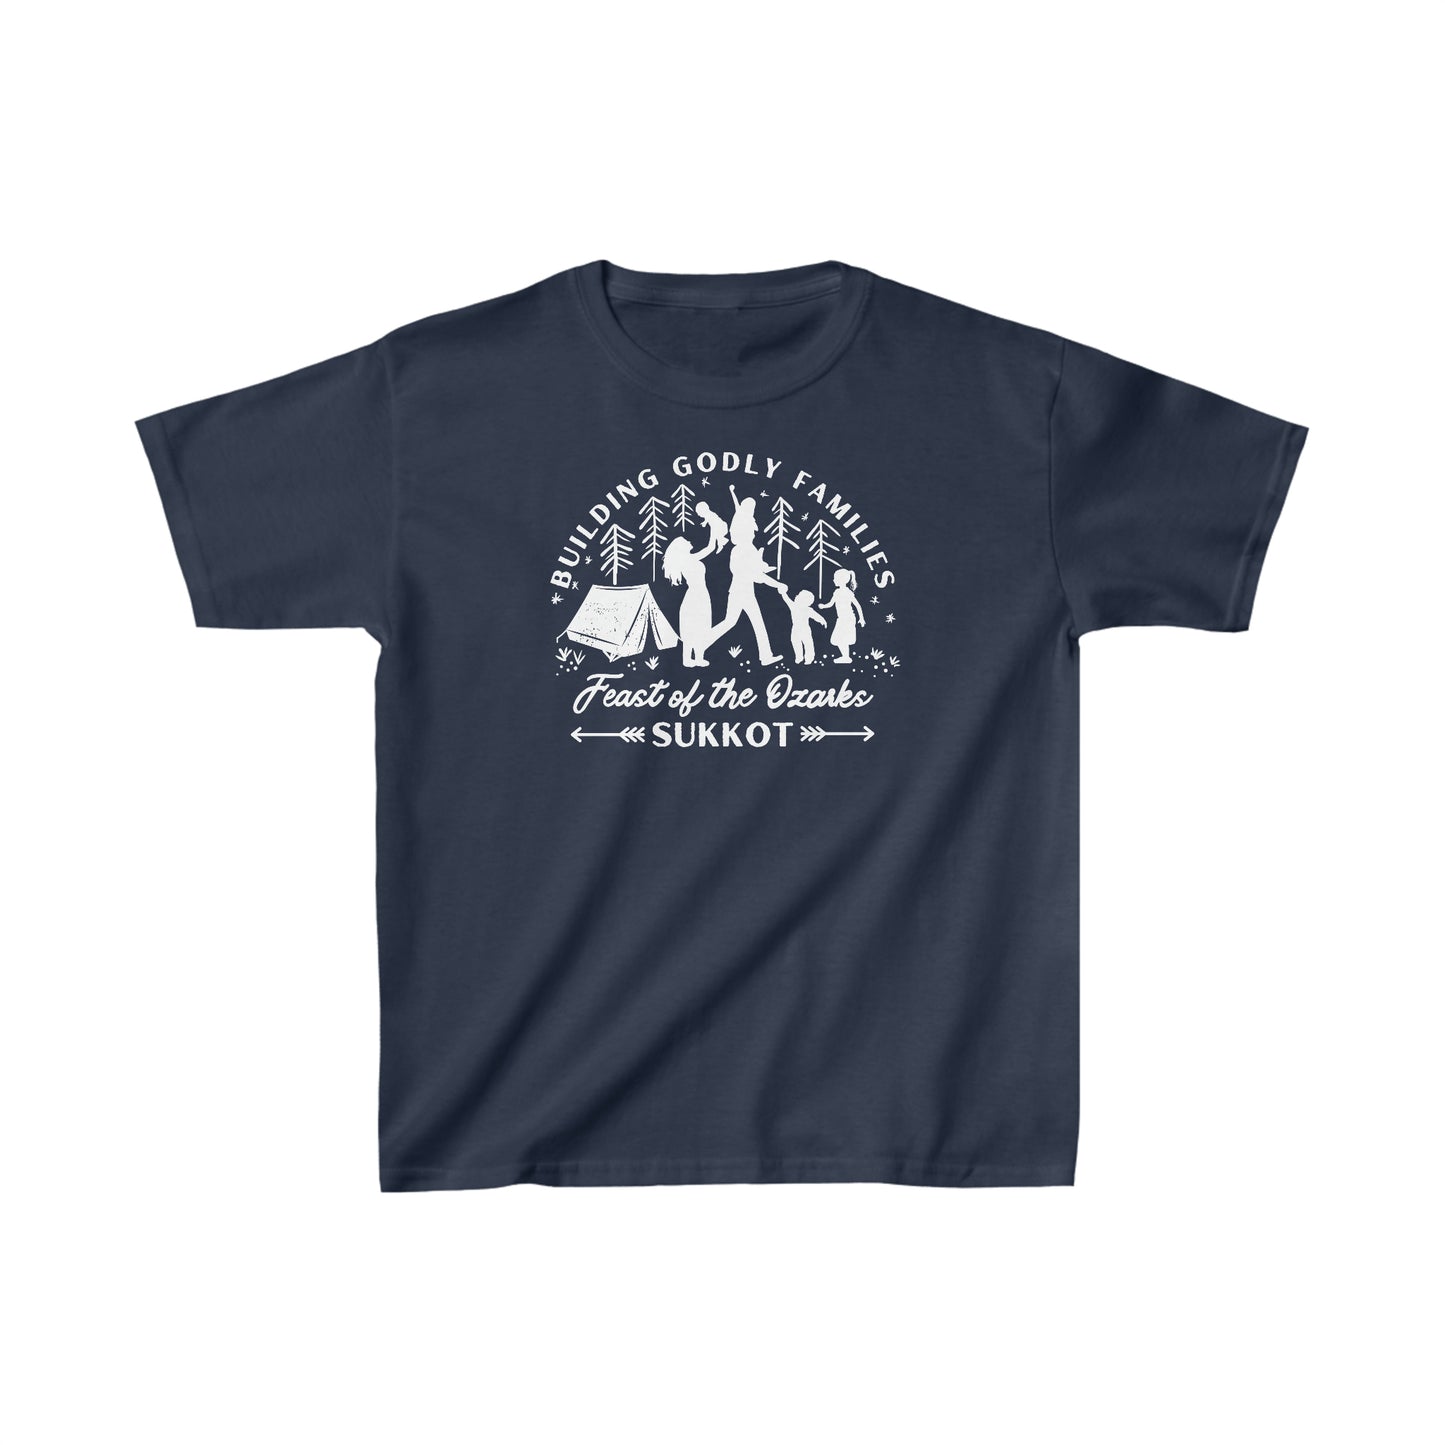 Children's Feast of the Ozarks Sukkot Tee With NO YEAR